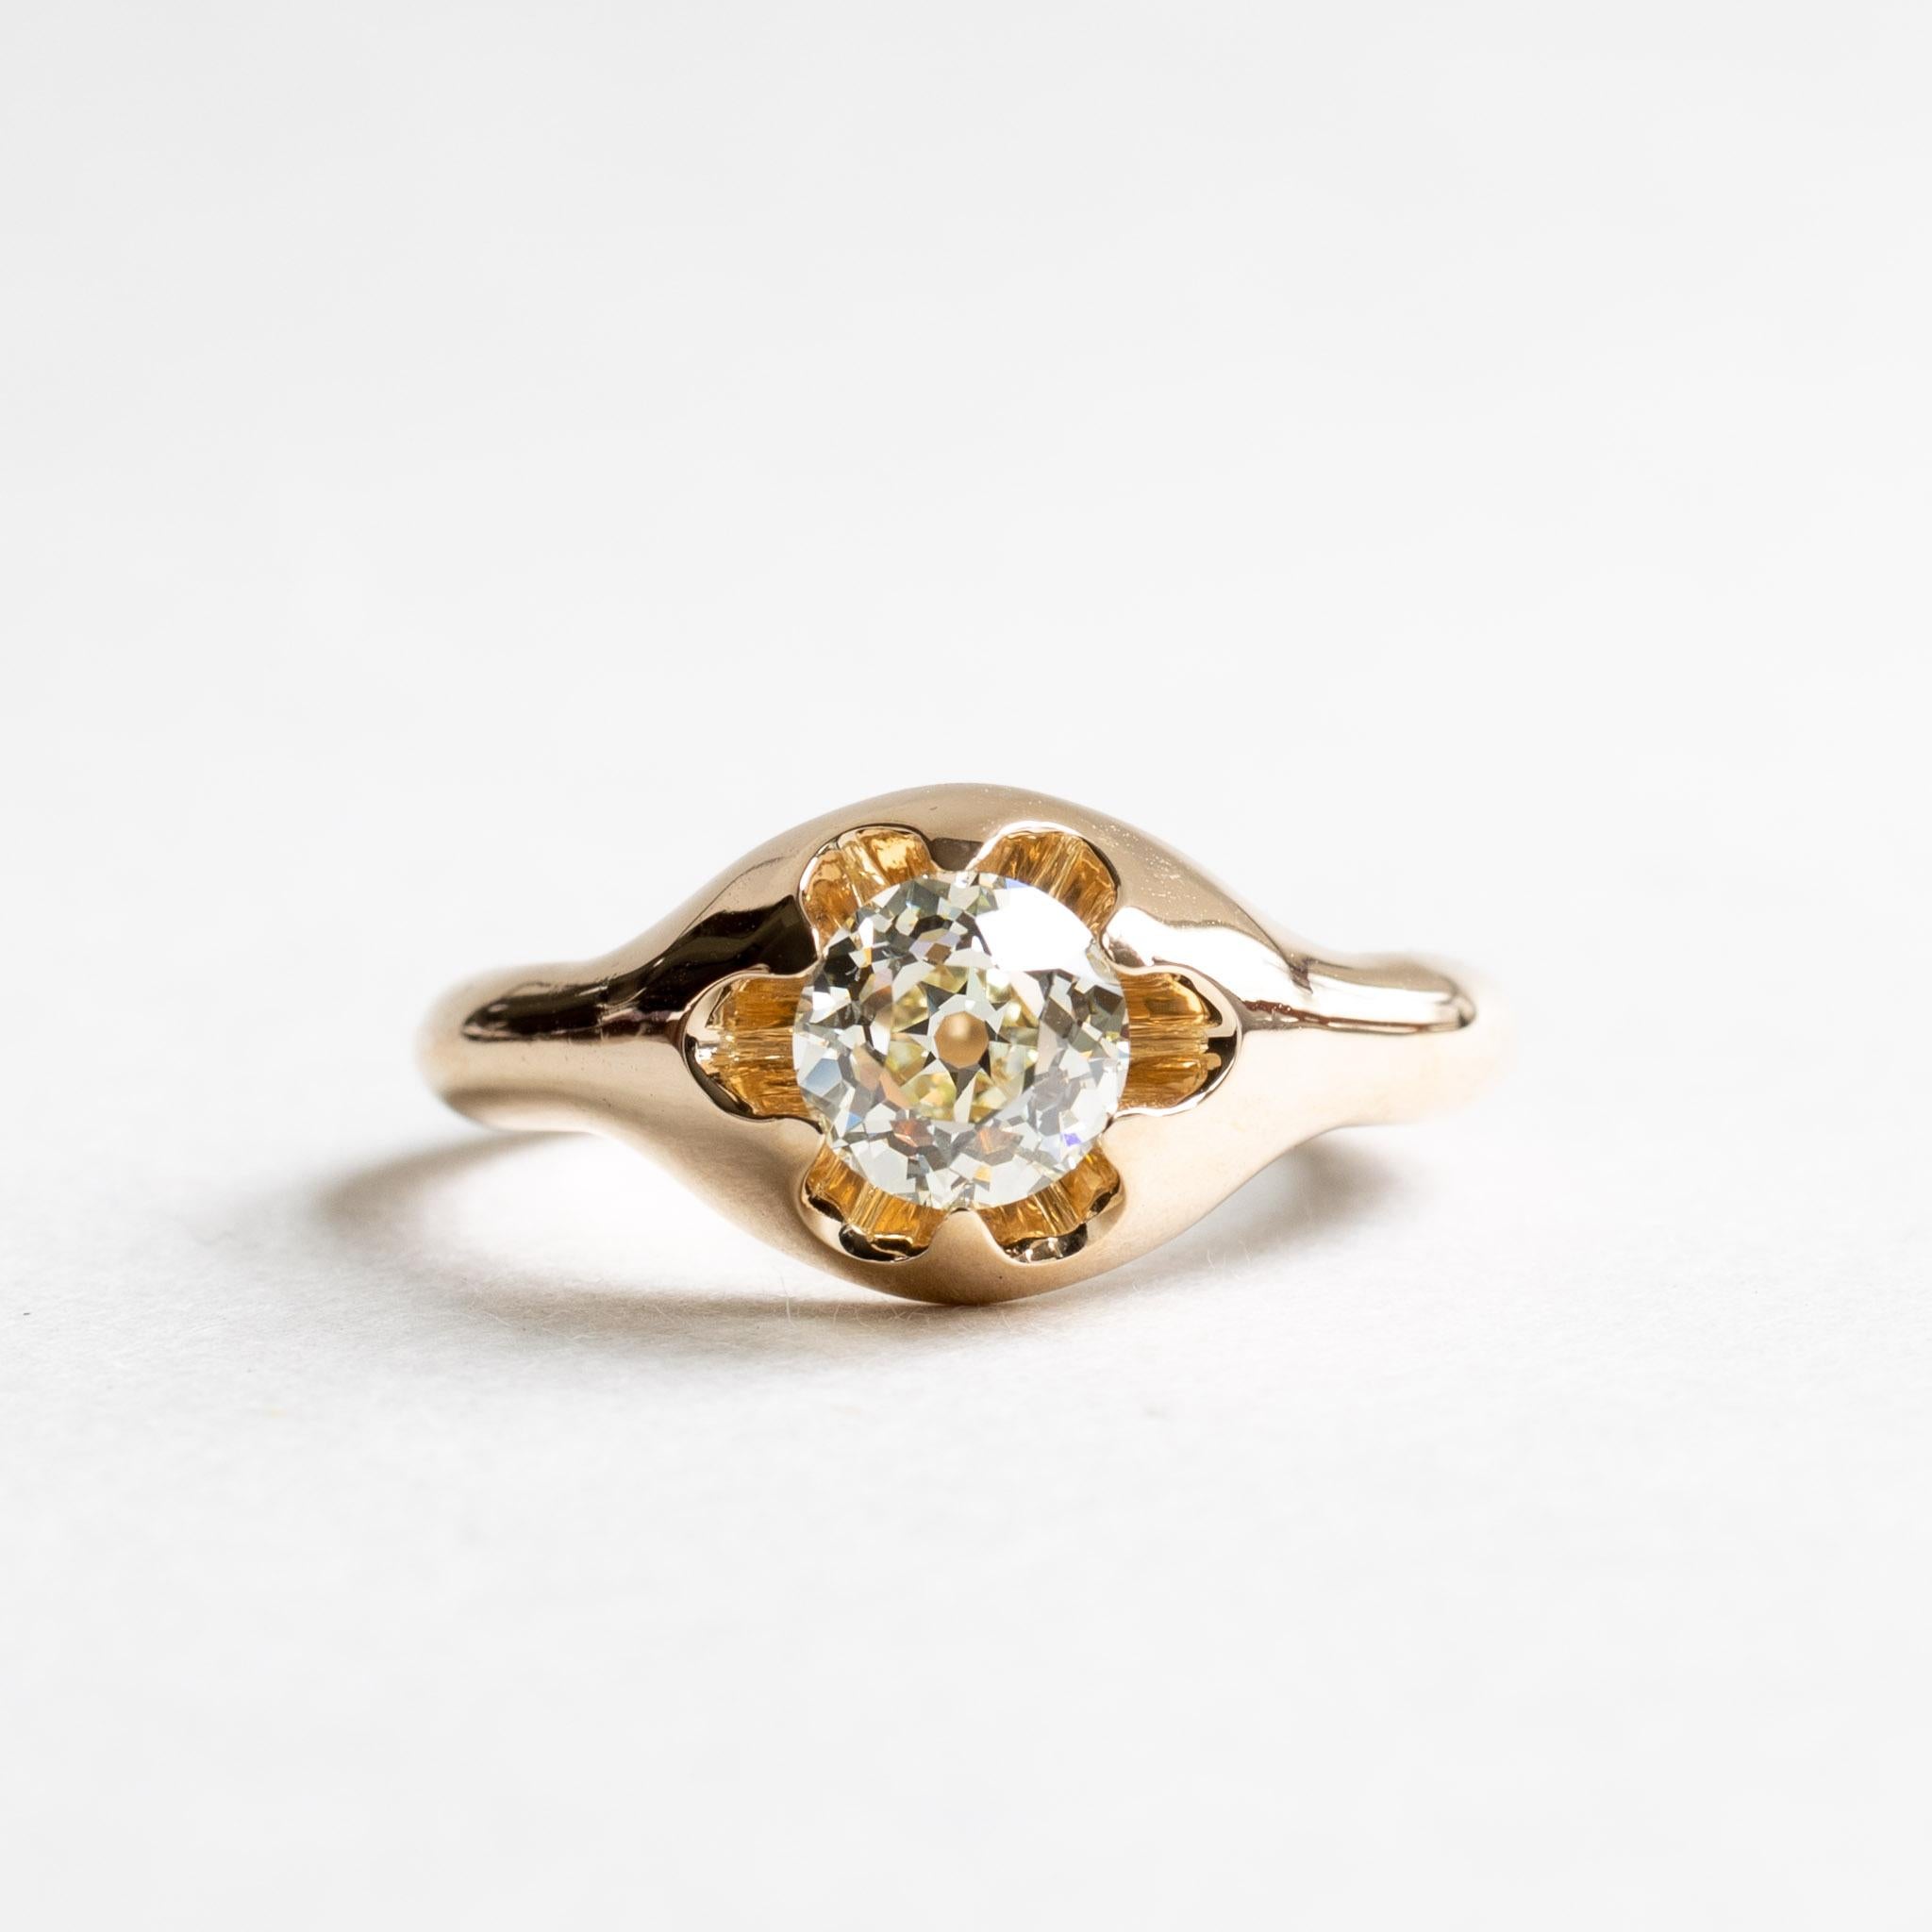 Metal: 18K Yellow Gold
Stone: Old Mine Diamond
Stone Shape: Cushion
Stone Size: 6mm x 4mm
Stone Weight: 1.10 Carat
Stone Color and Clarity: O-P, VS2
GIA certificate included. 
Band Width: 3.5mm x 2mm shank
Size 7 is ready to ship. 